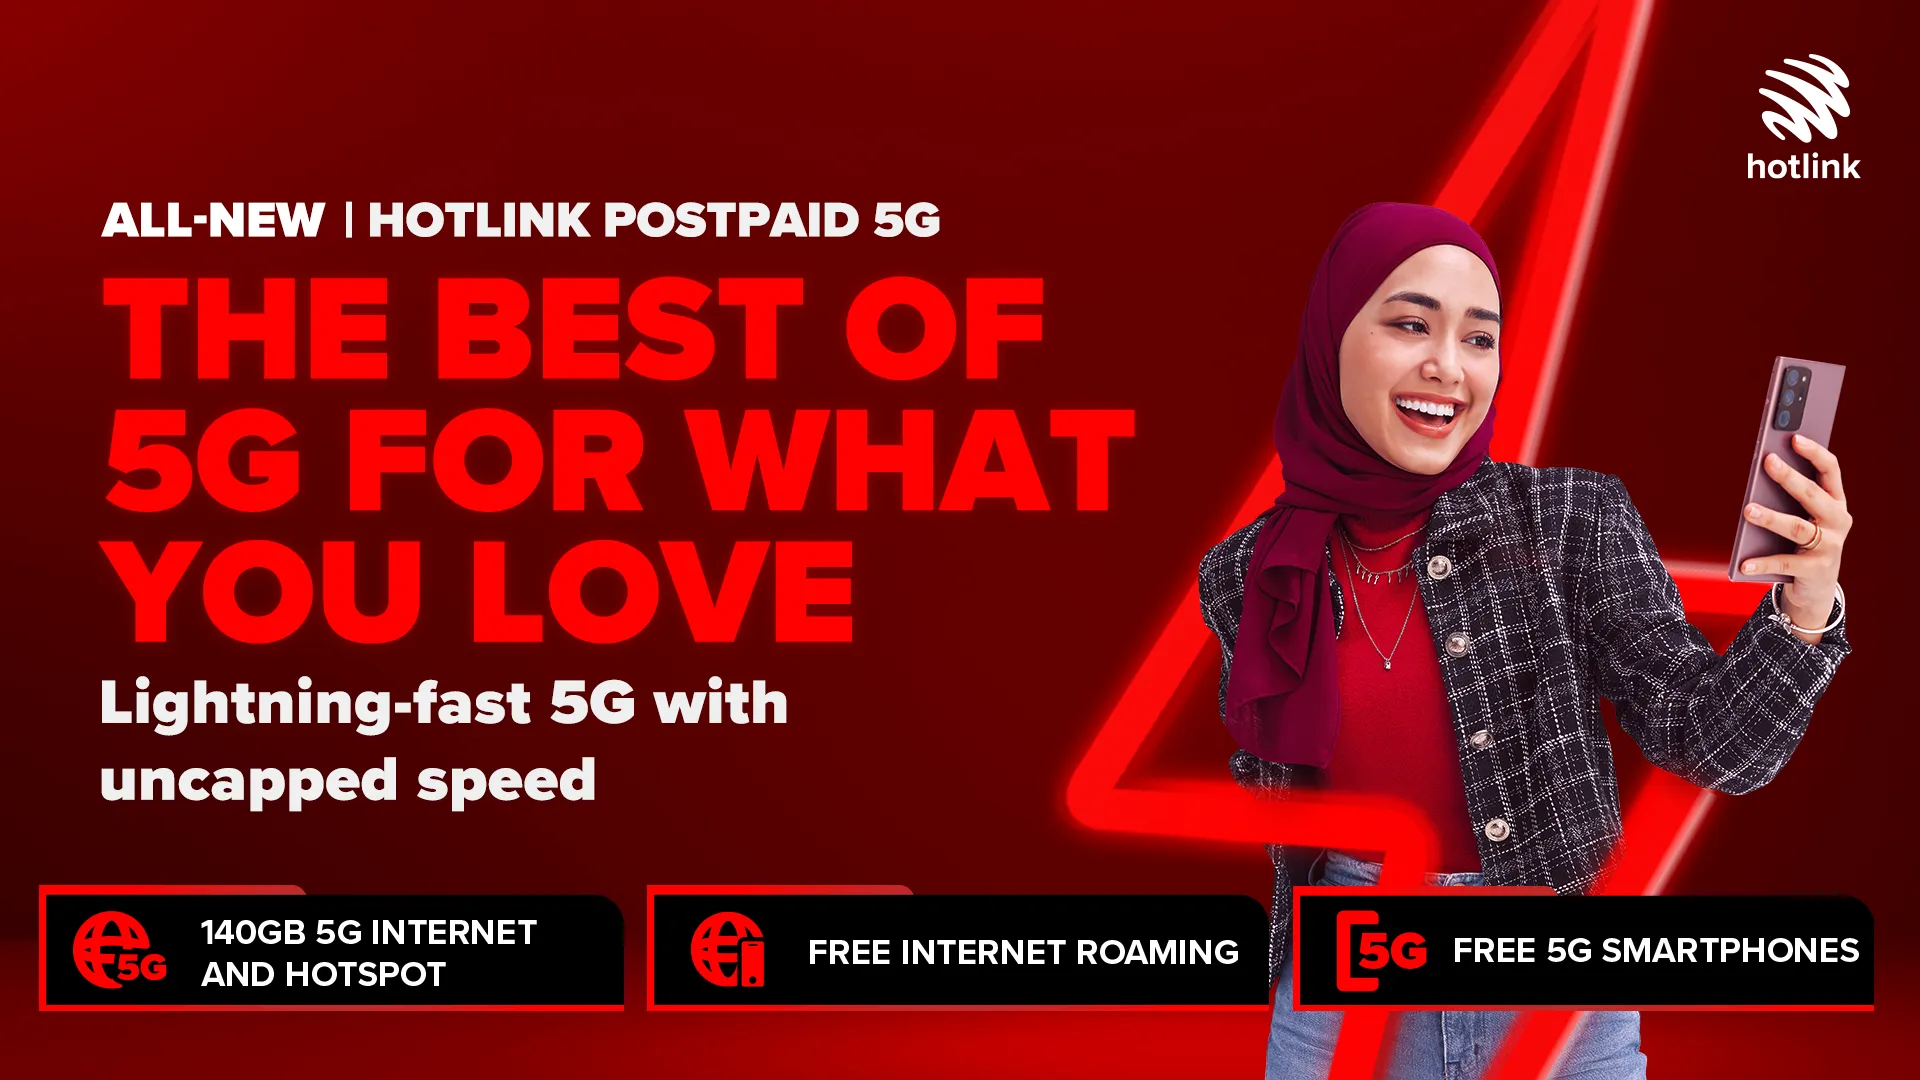 All-New Hotlink Postpaid